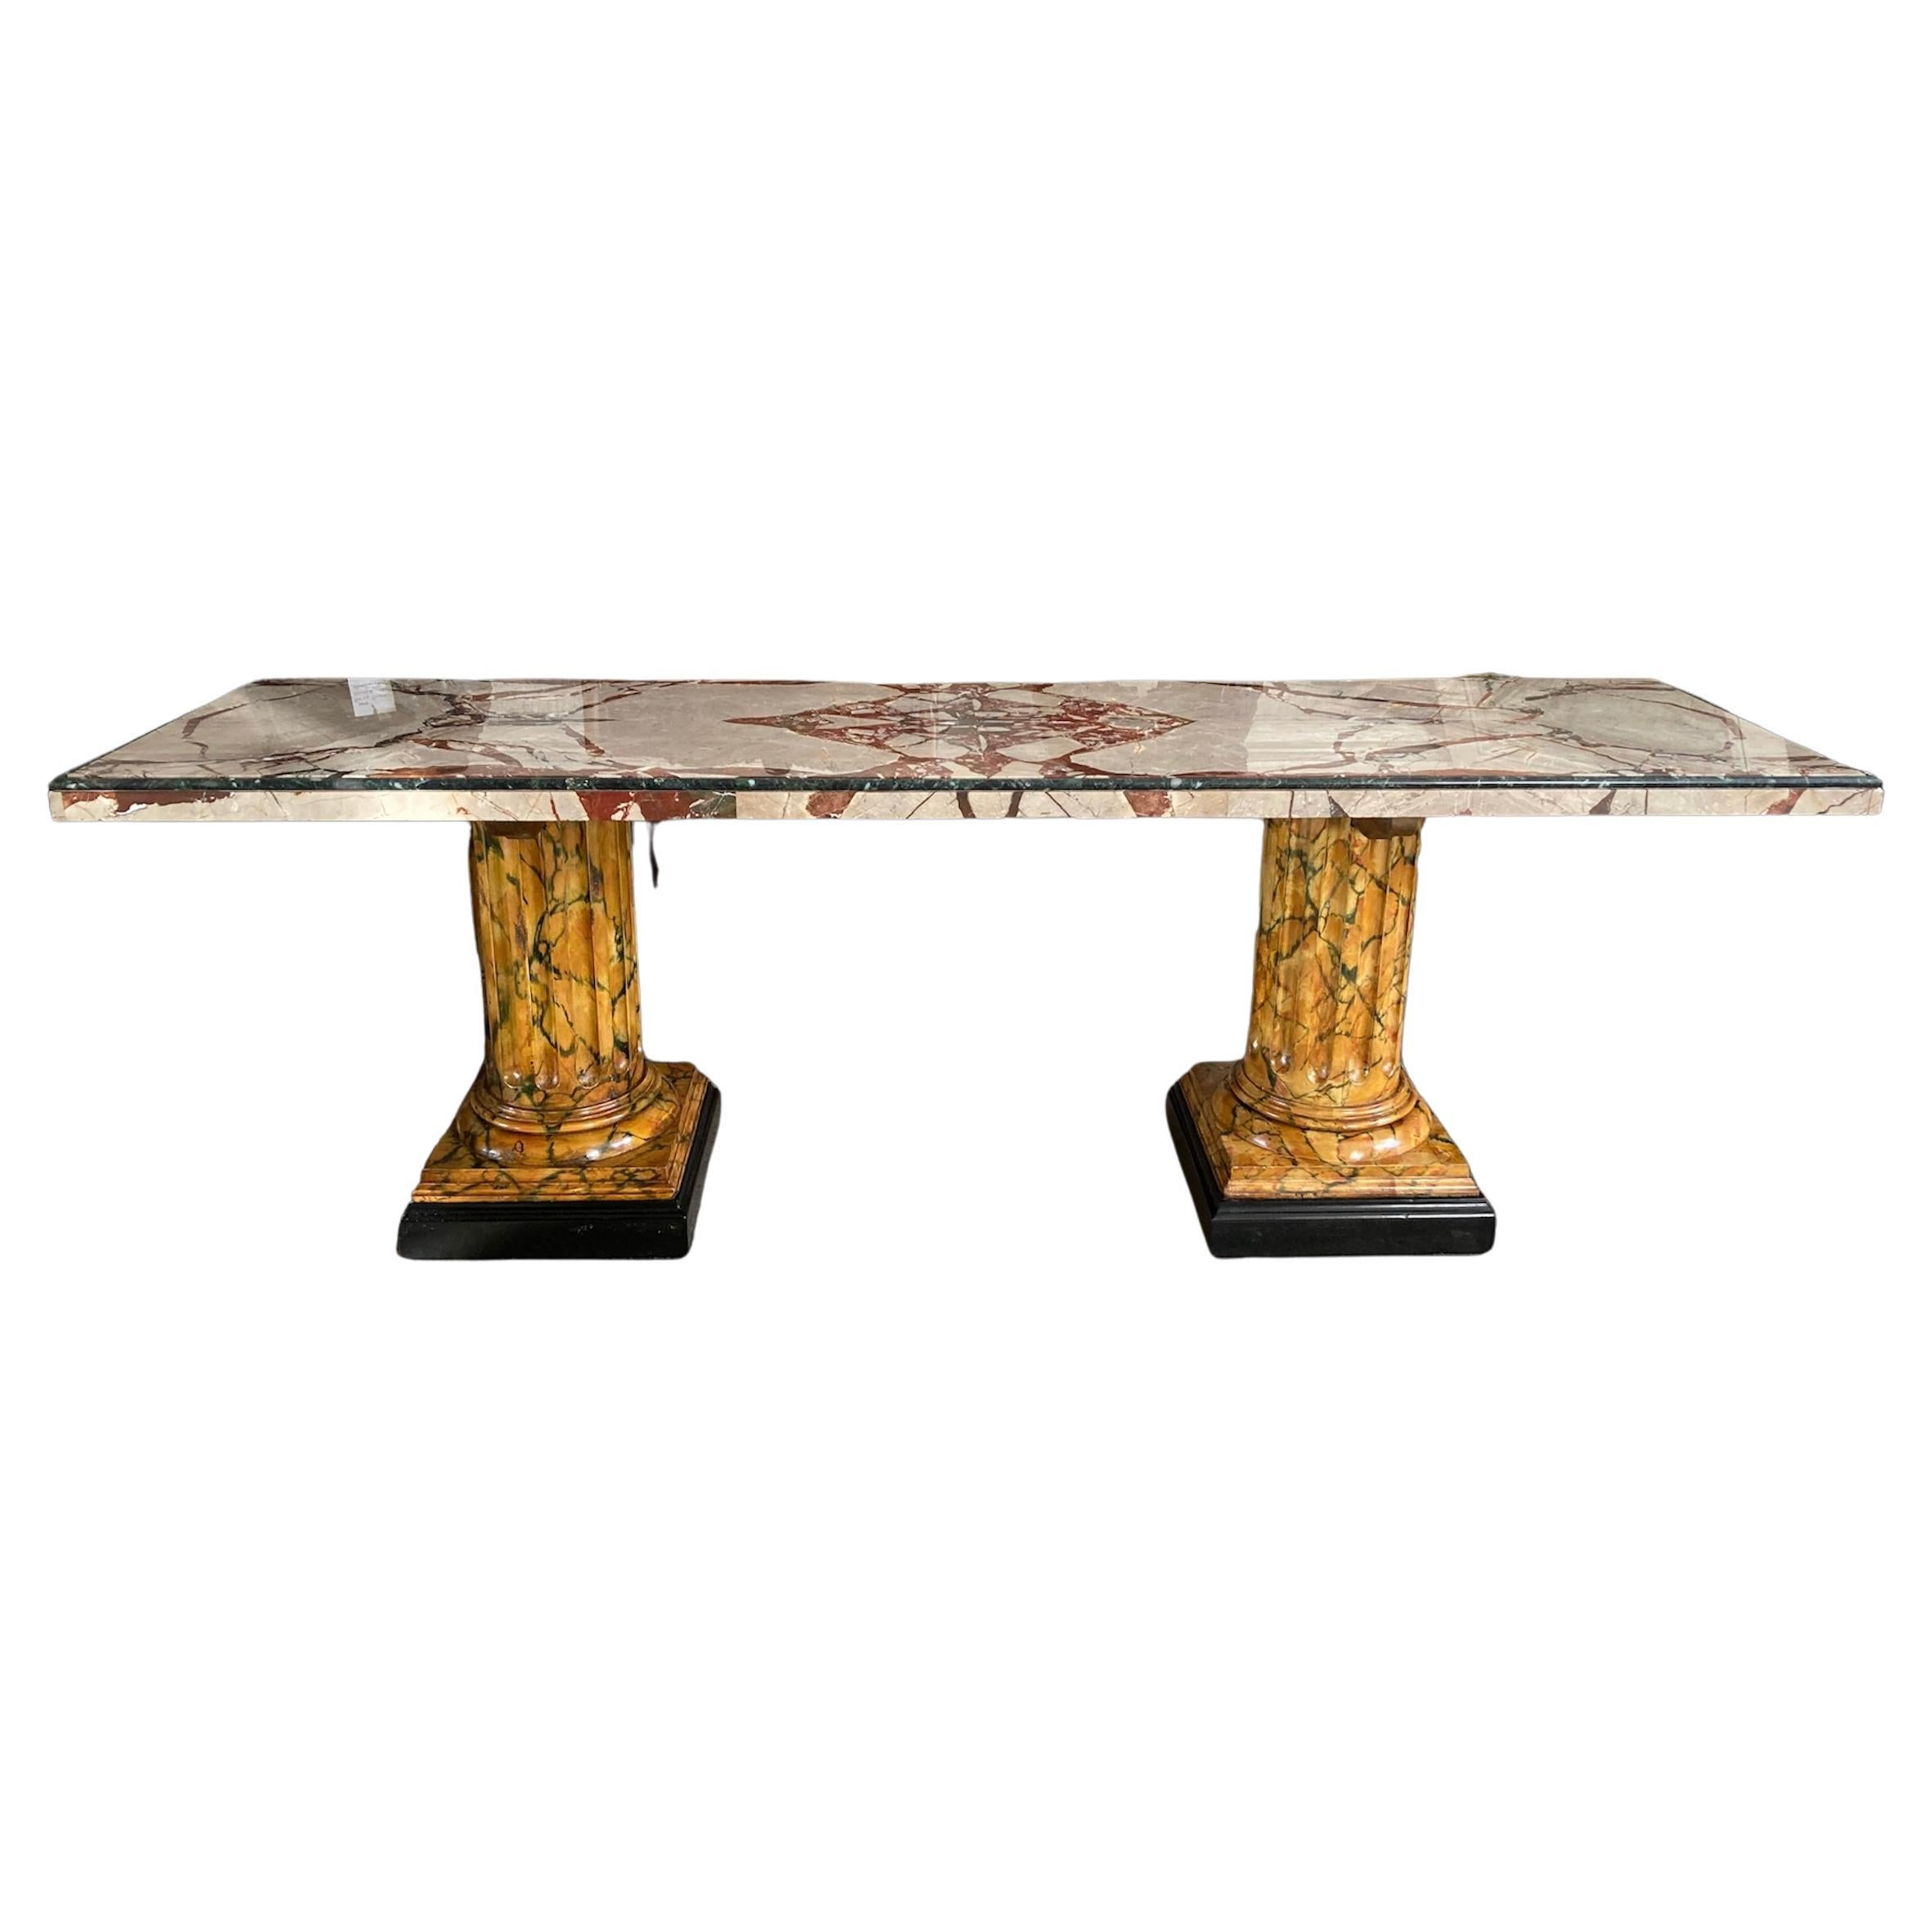 Striking 19th C Marble Top Coffee Table